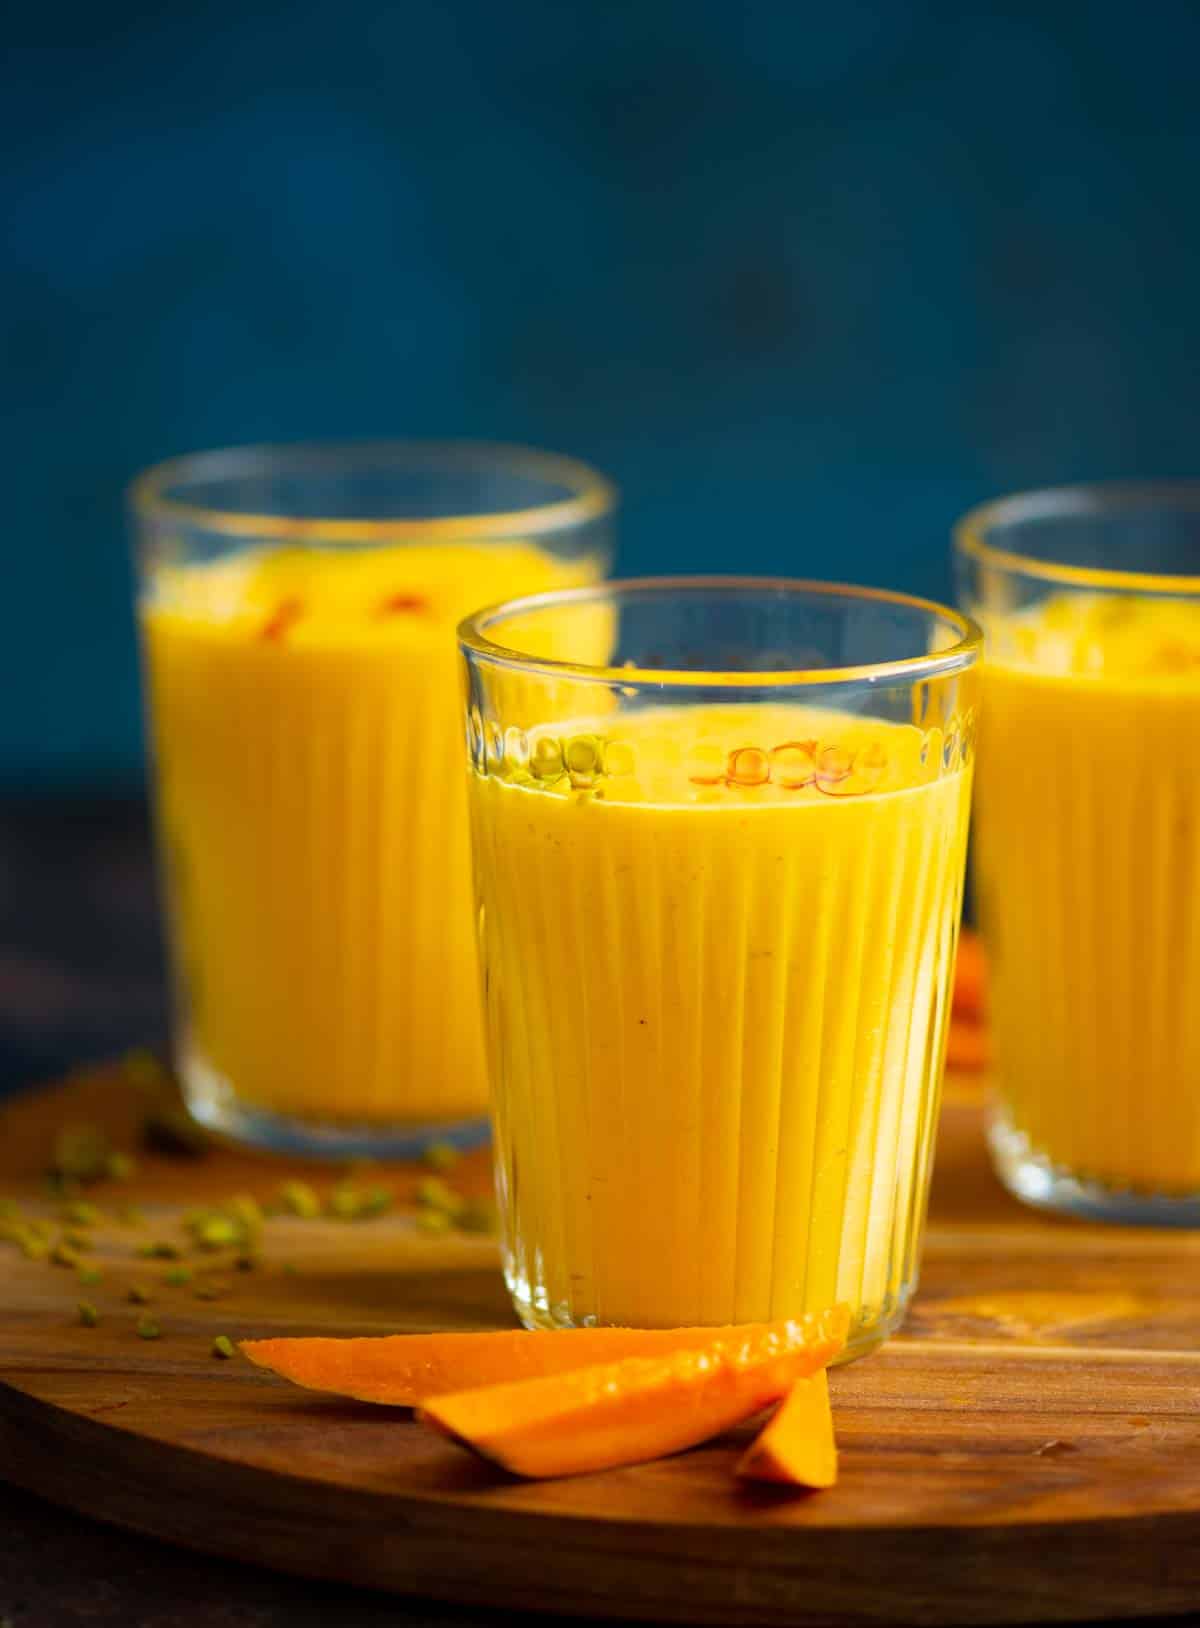 Mango clices in front of glasses of mango lassi